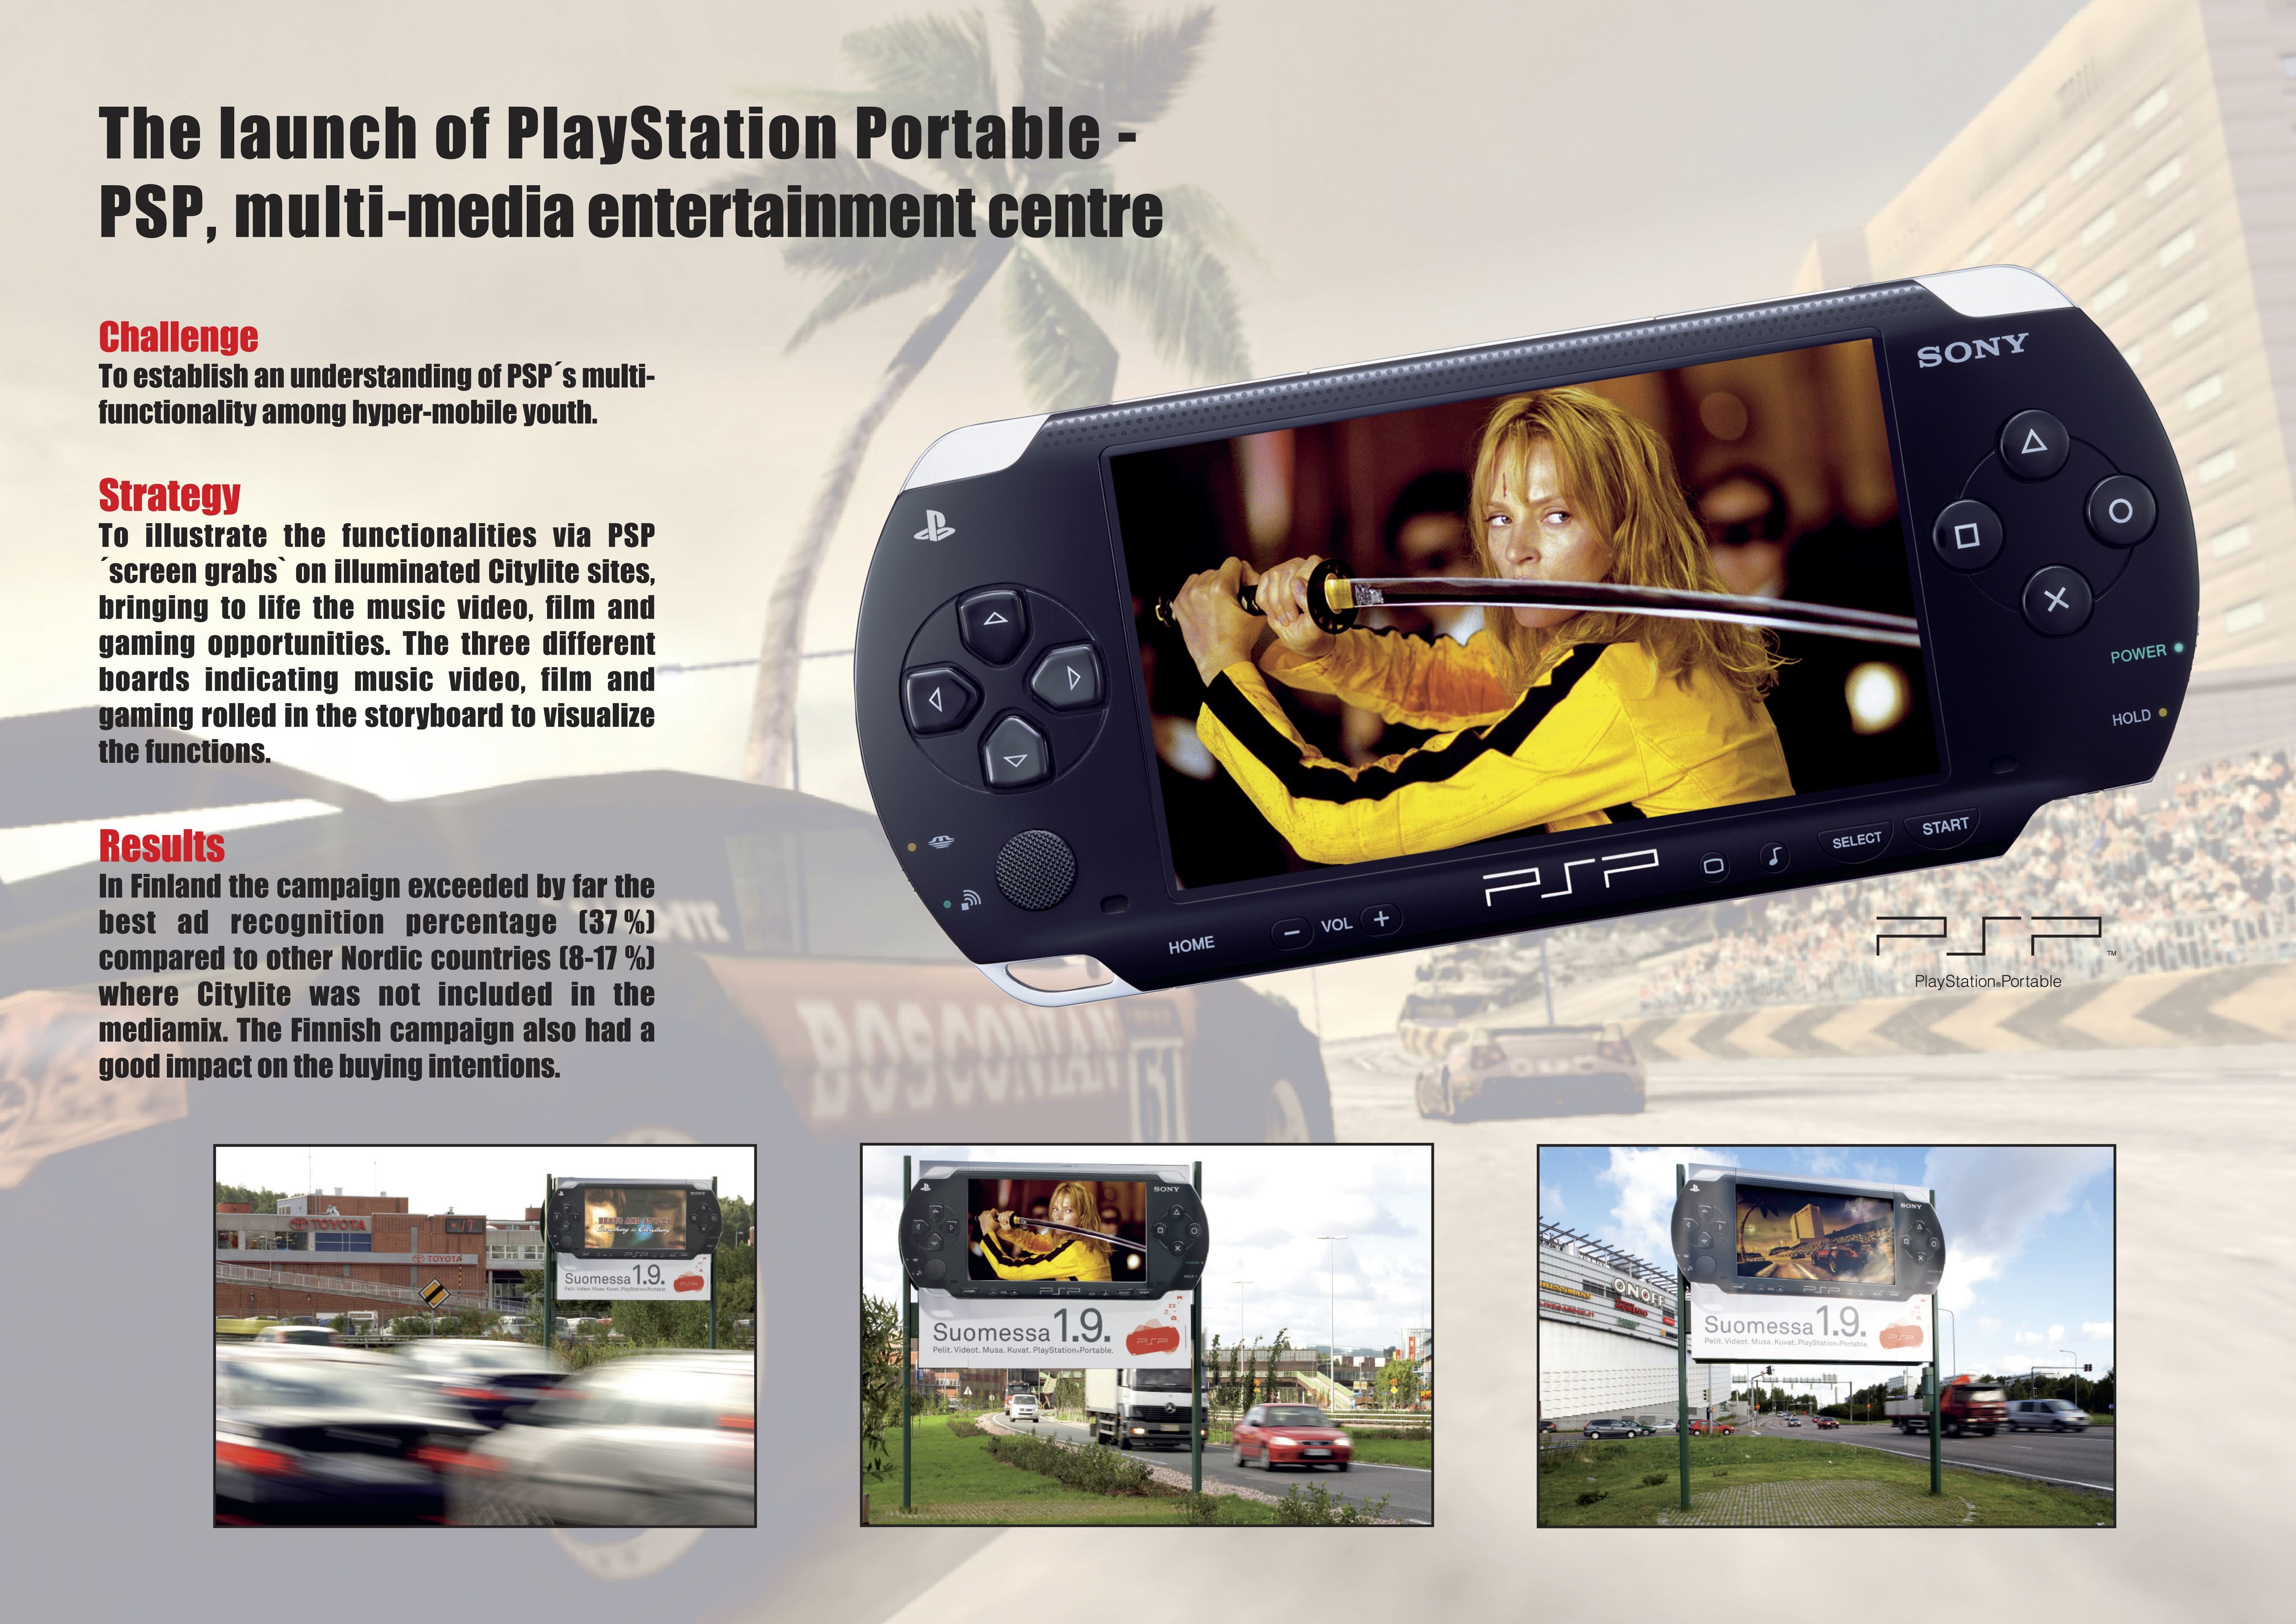 PSP GAME CONSOLE